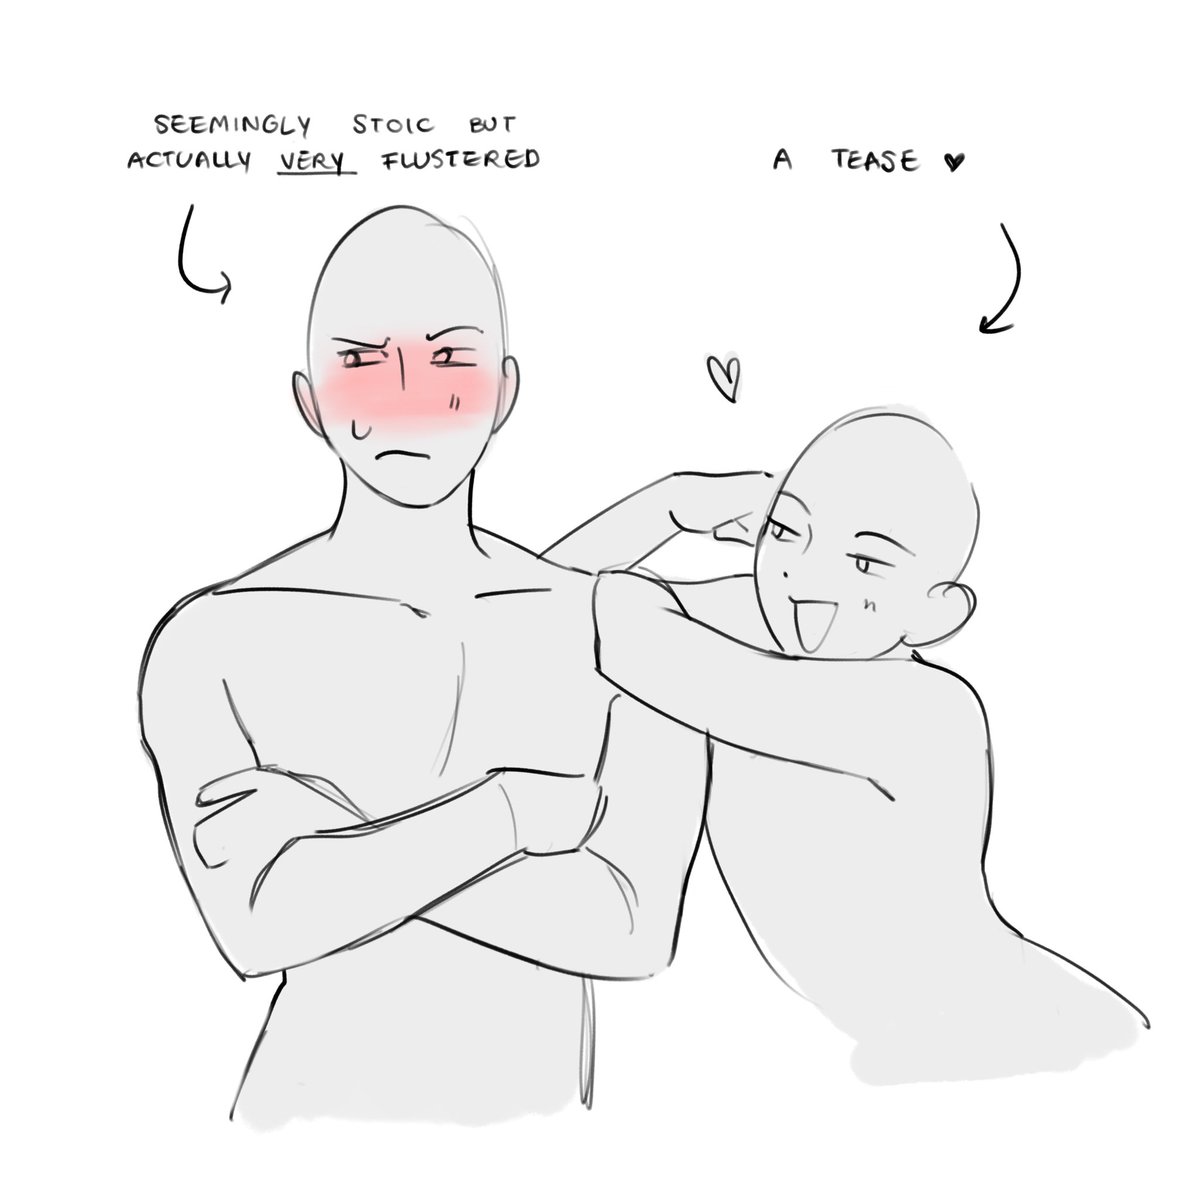 my fave ship dynamic, you ask…?